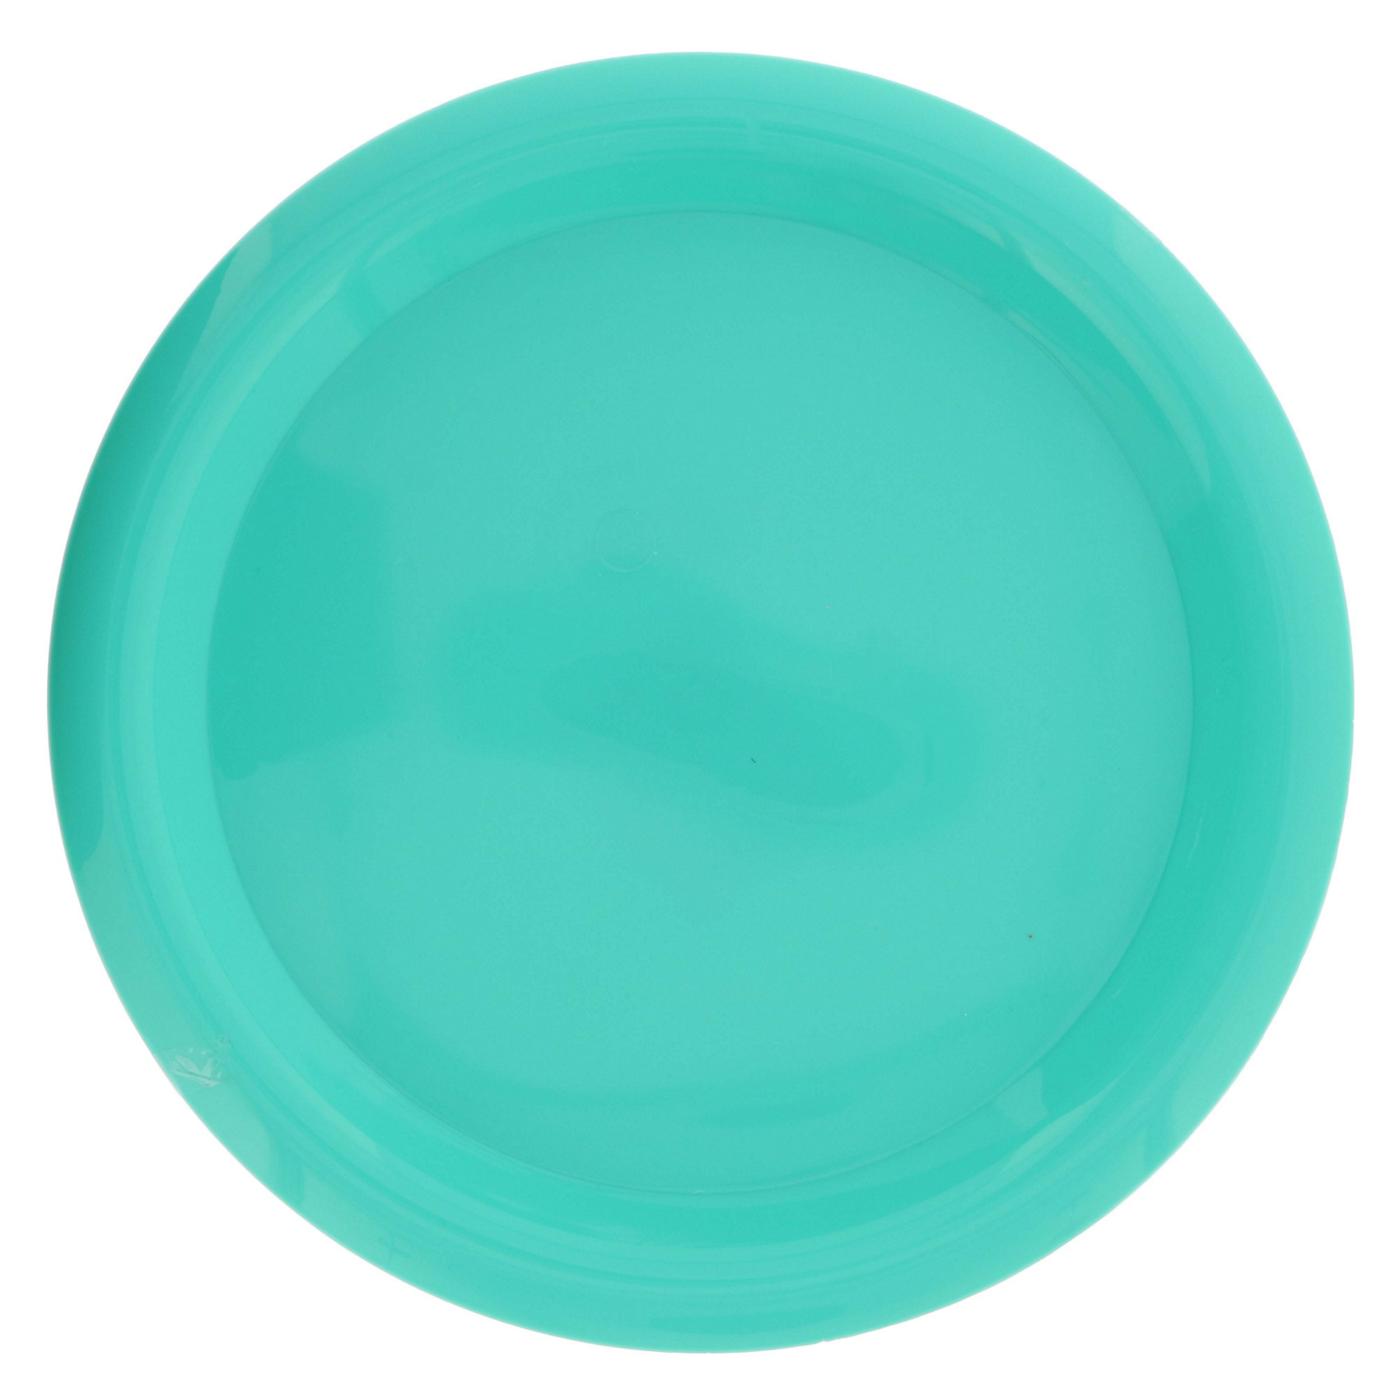 Dining Style Summer Value Plate 4 pk; image 1 of 2